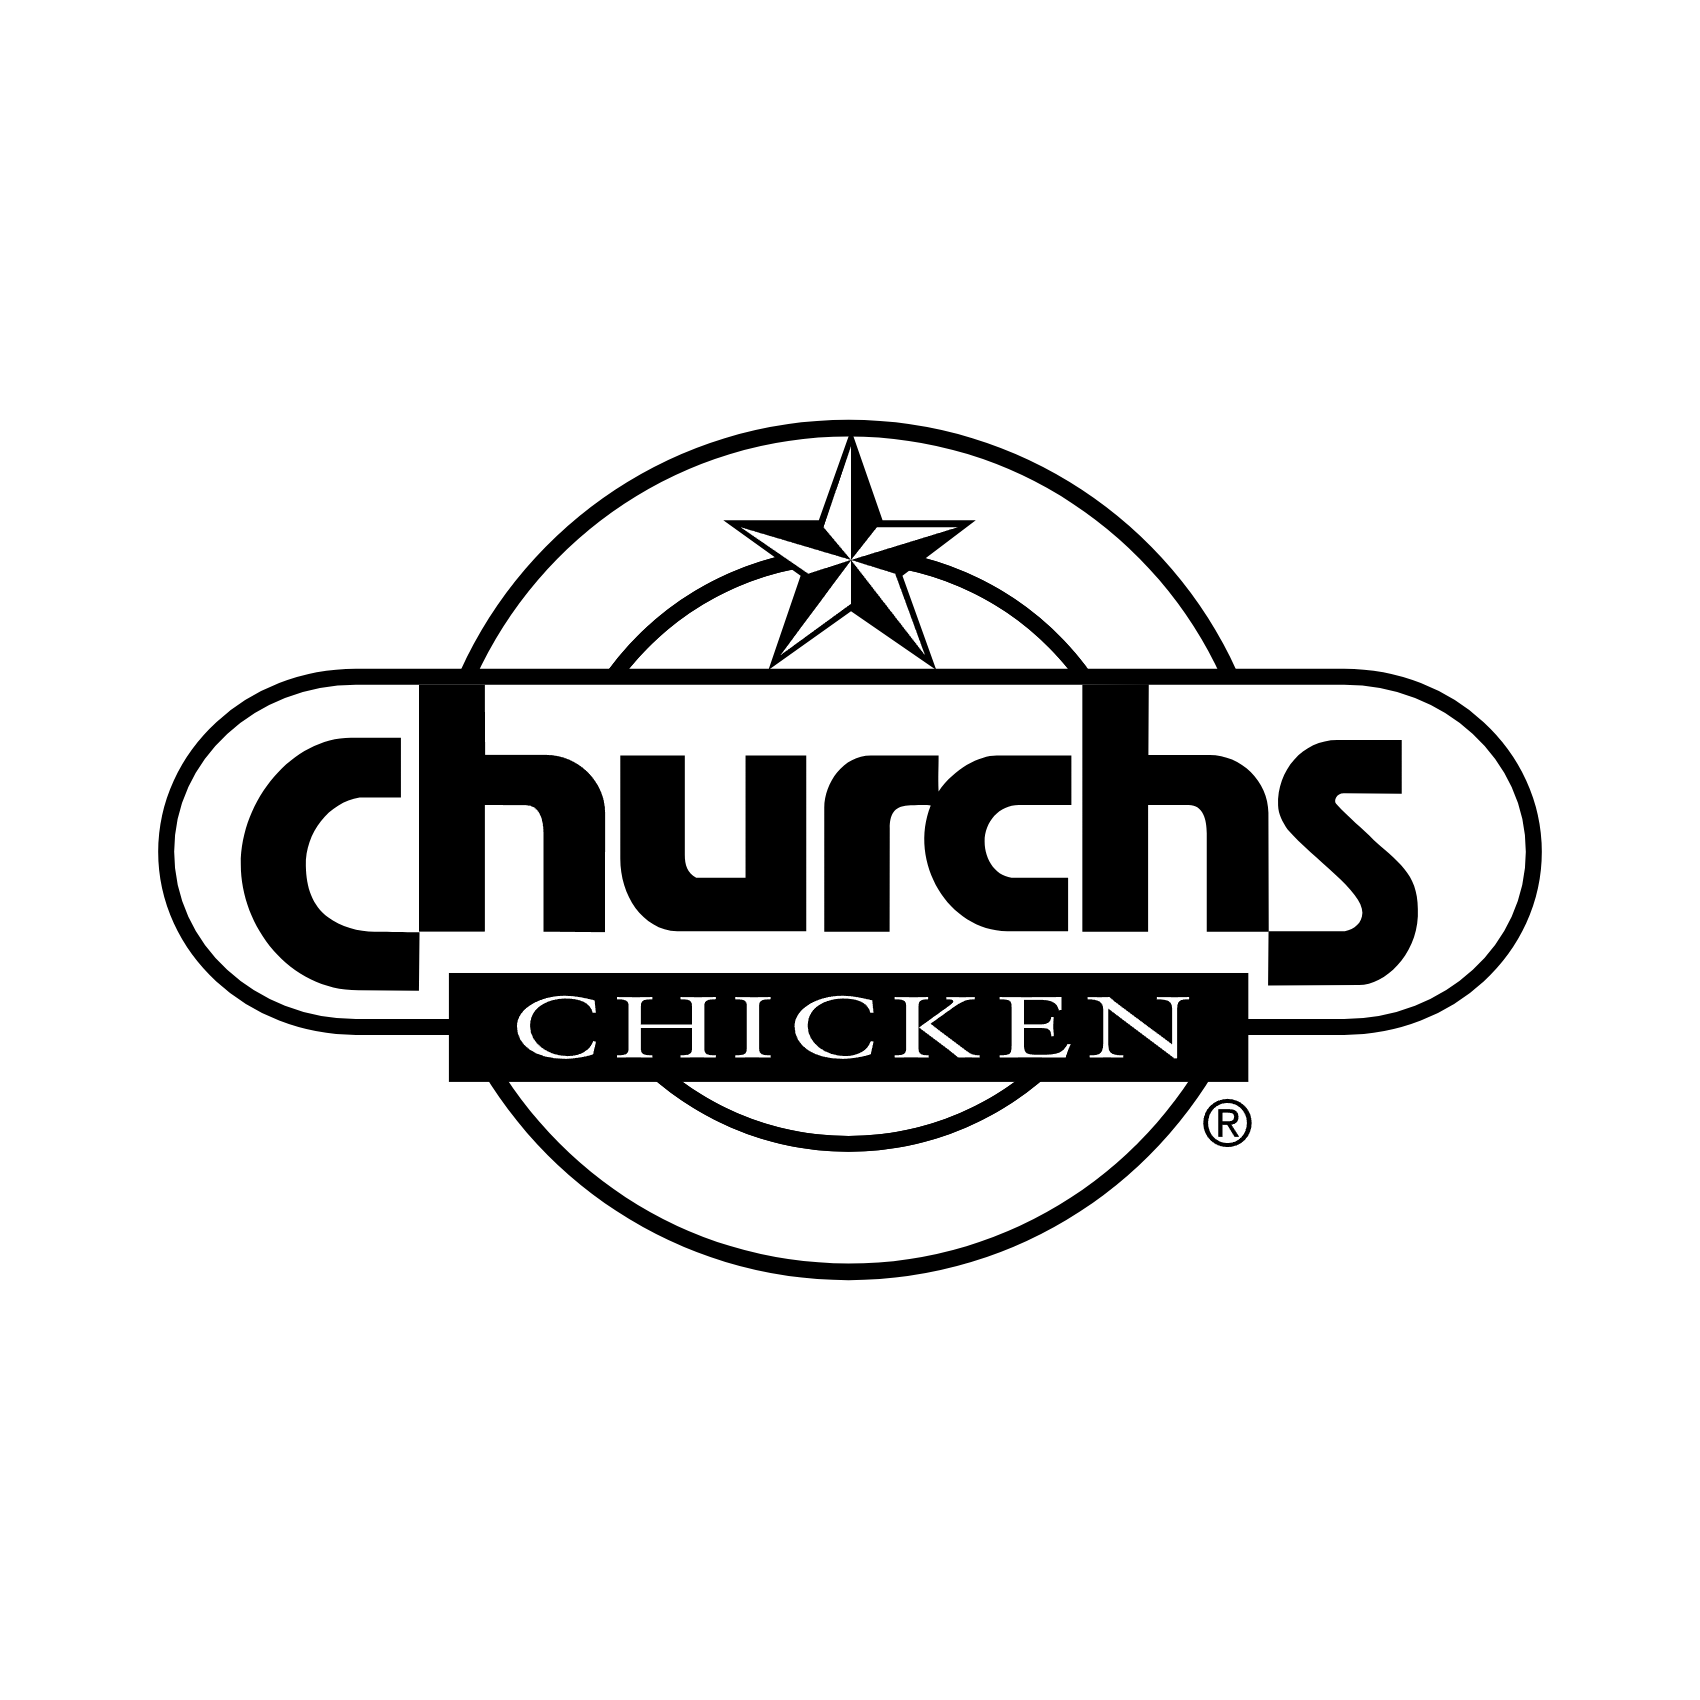 Download Churchs chicken Logo PNG and Vector (PDF, SVG, Ai, EPS) Free